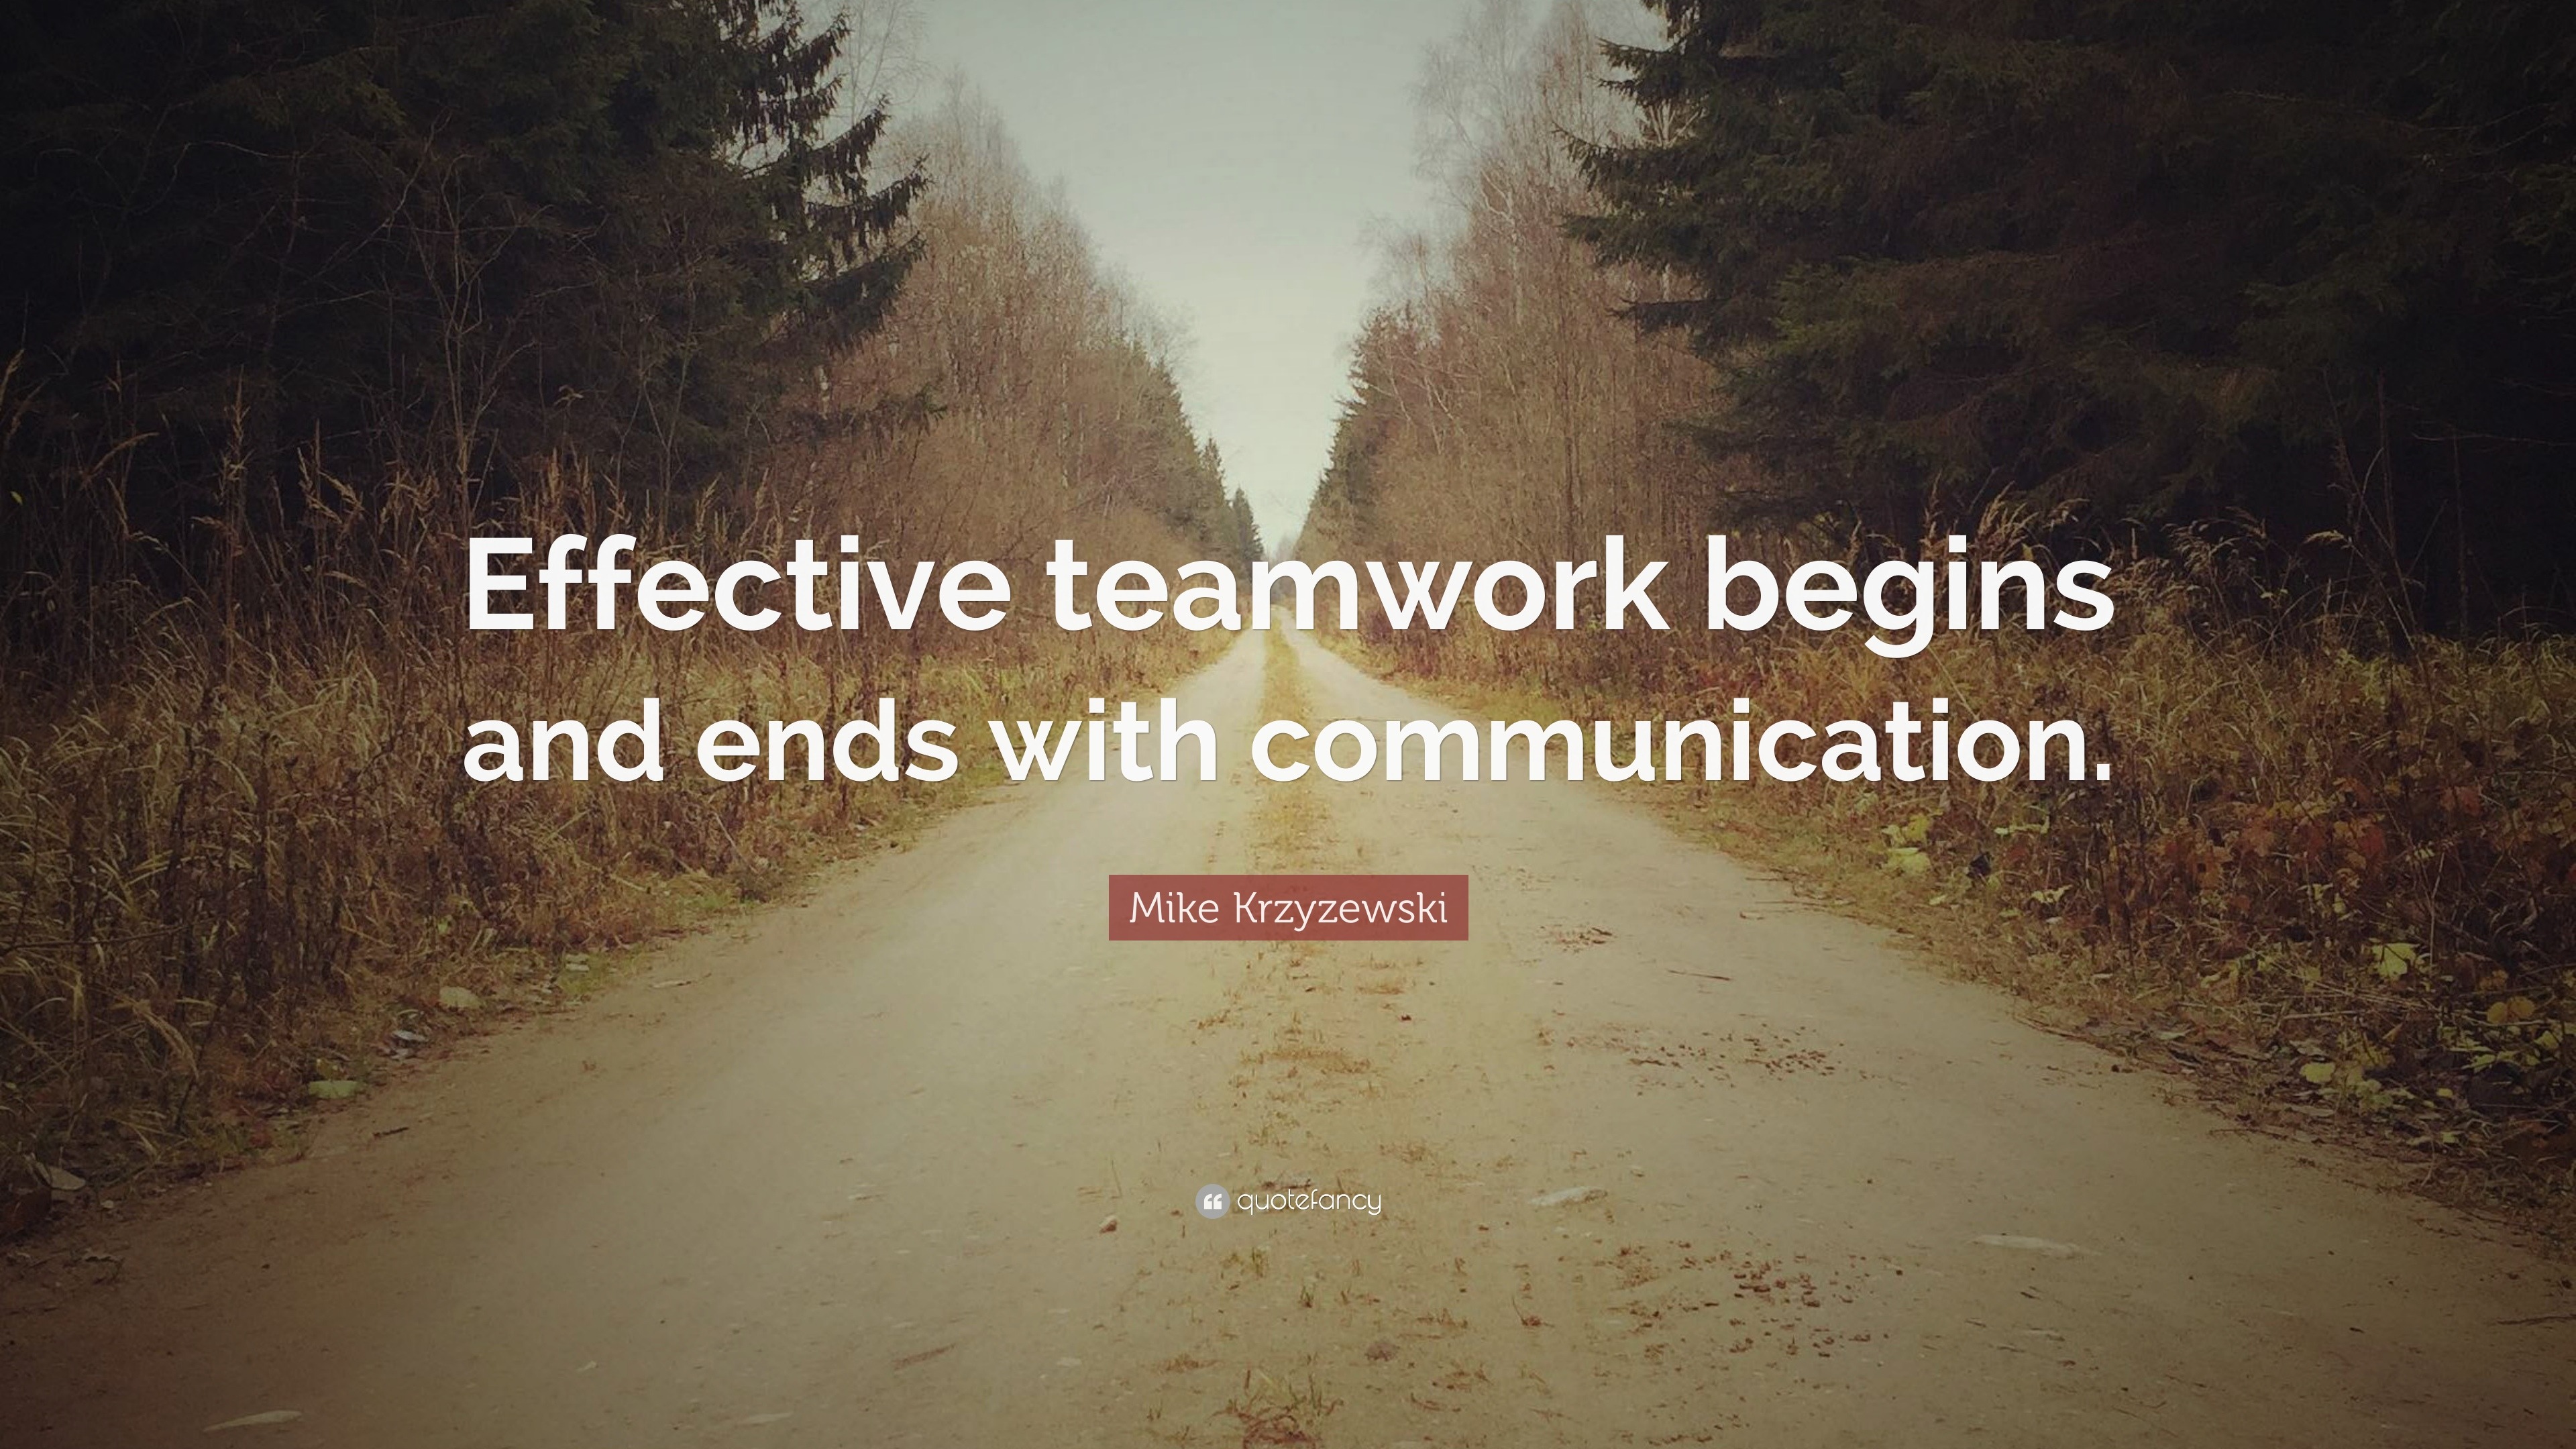 Mike Krzyzewski Quote: “Effective teamwork begins and ends with ...